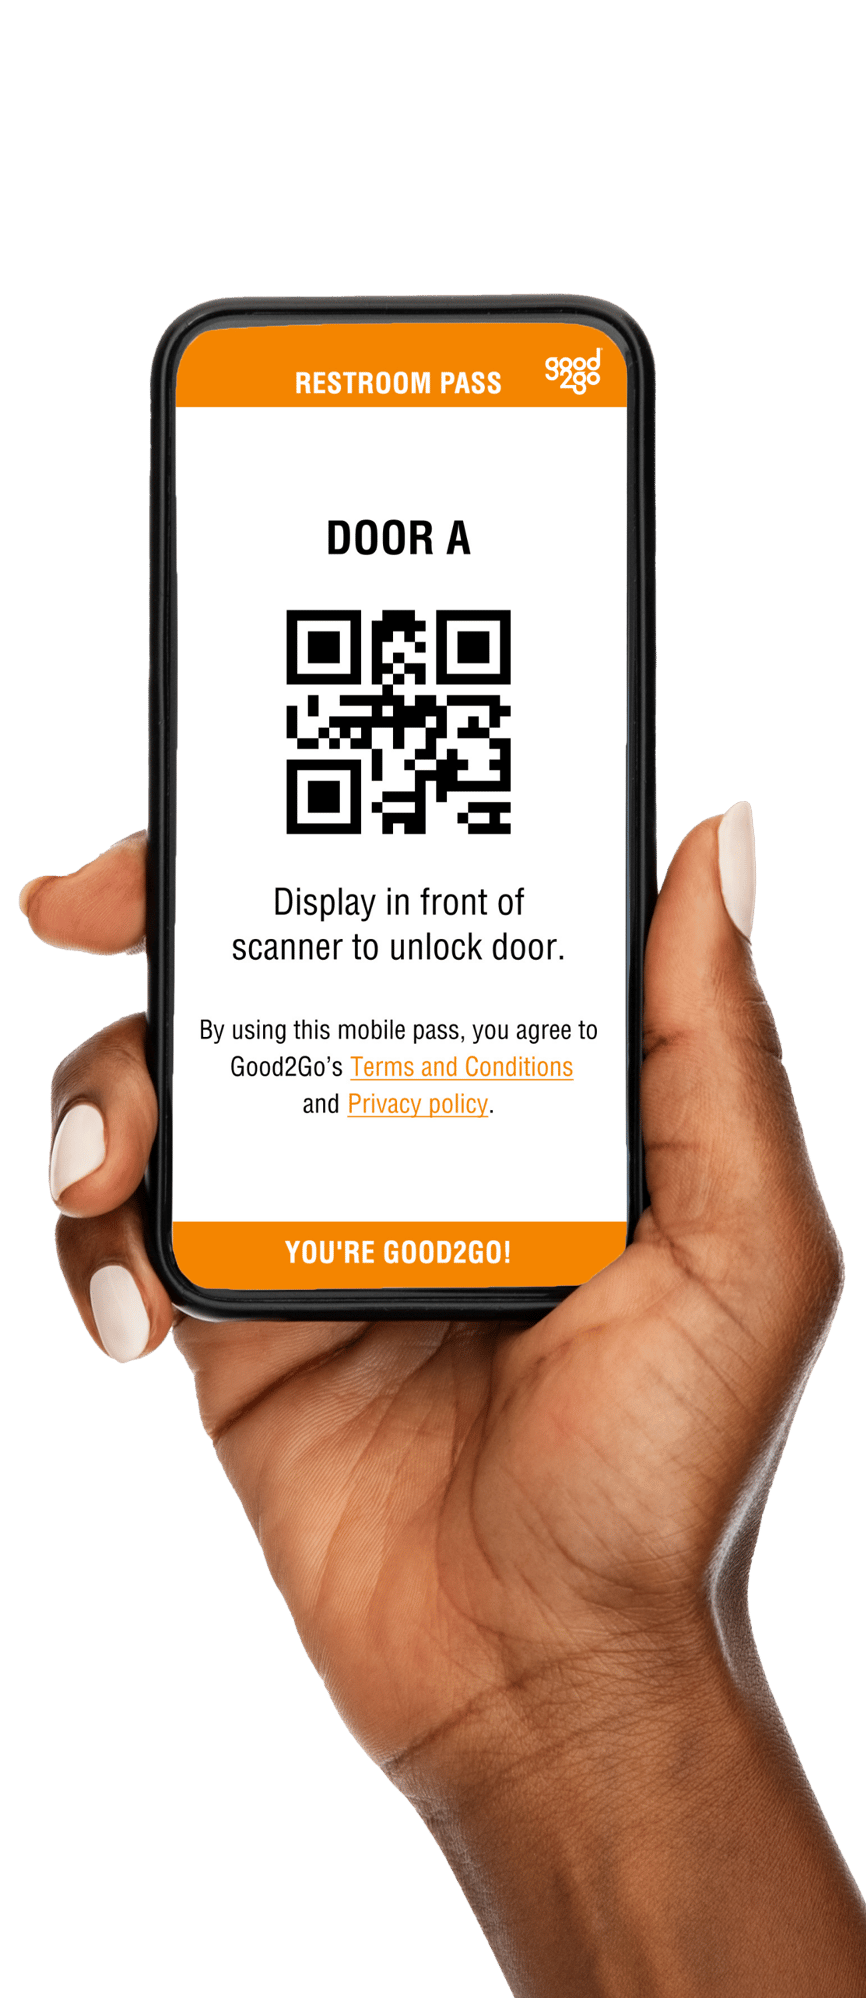 Hand holding smartphone with Goo2Go mobile pass.